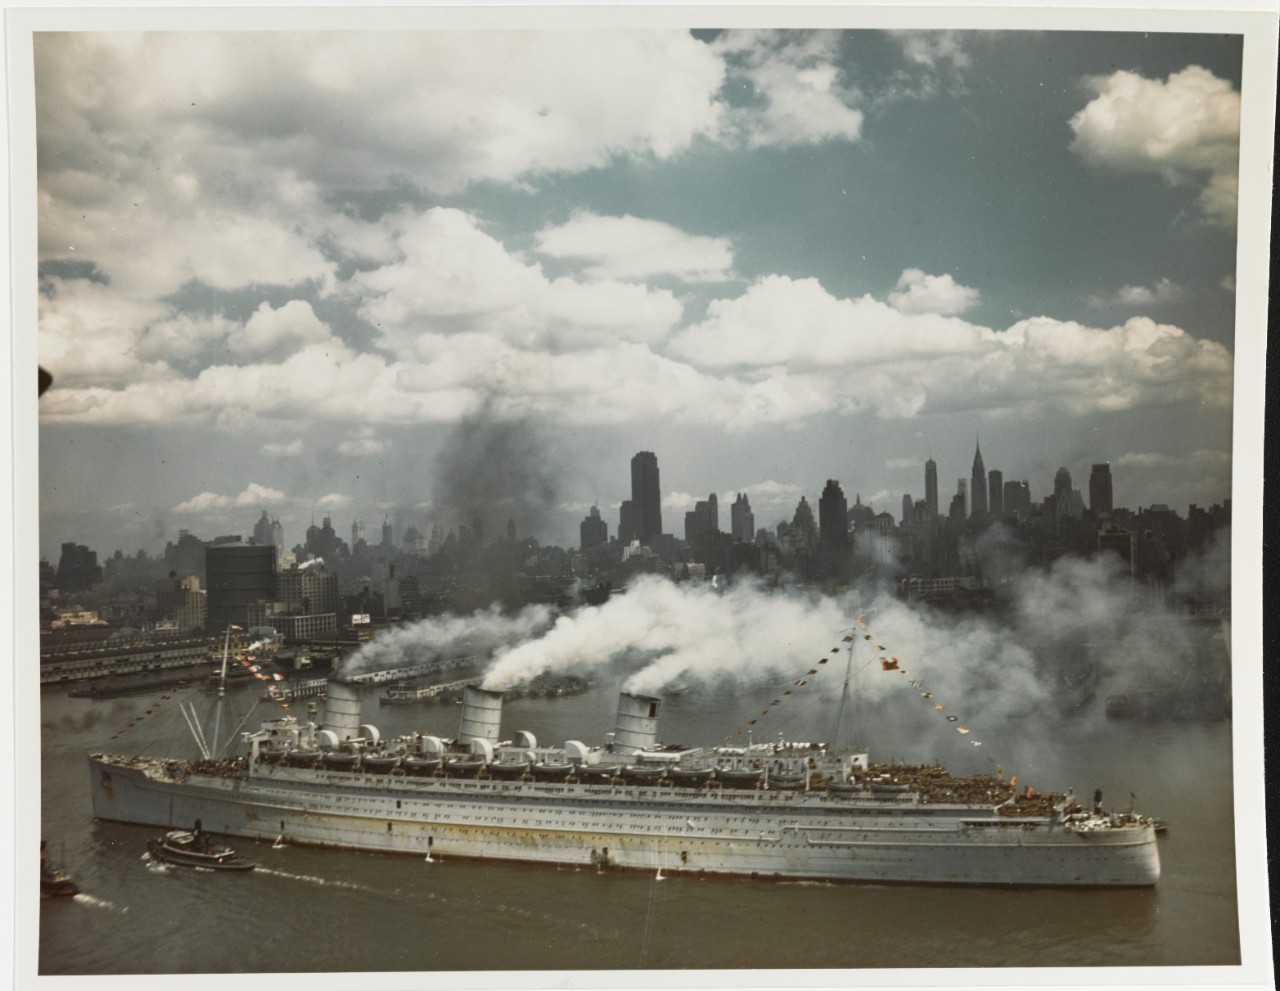 QUEEN MARY arrives in New York City with thousands of U.S. troops on board, 20 June 1945